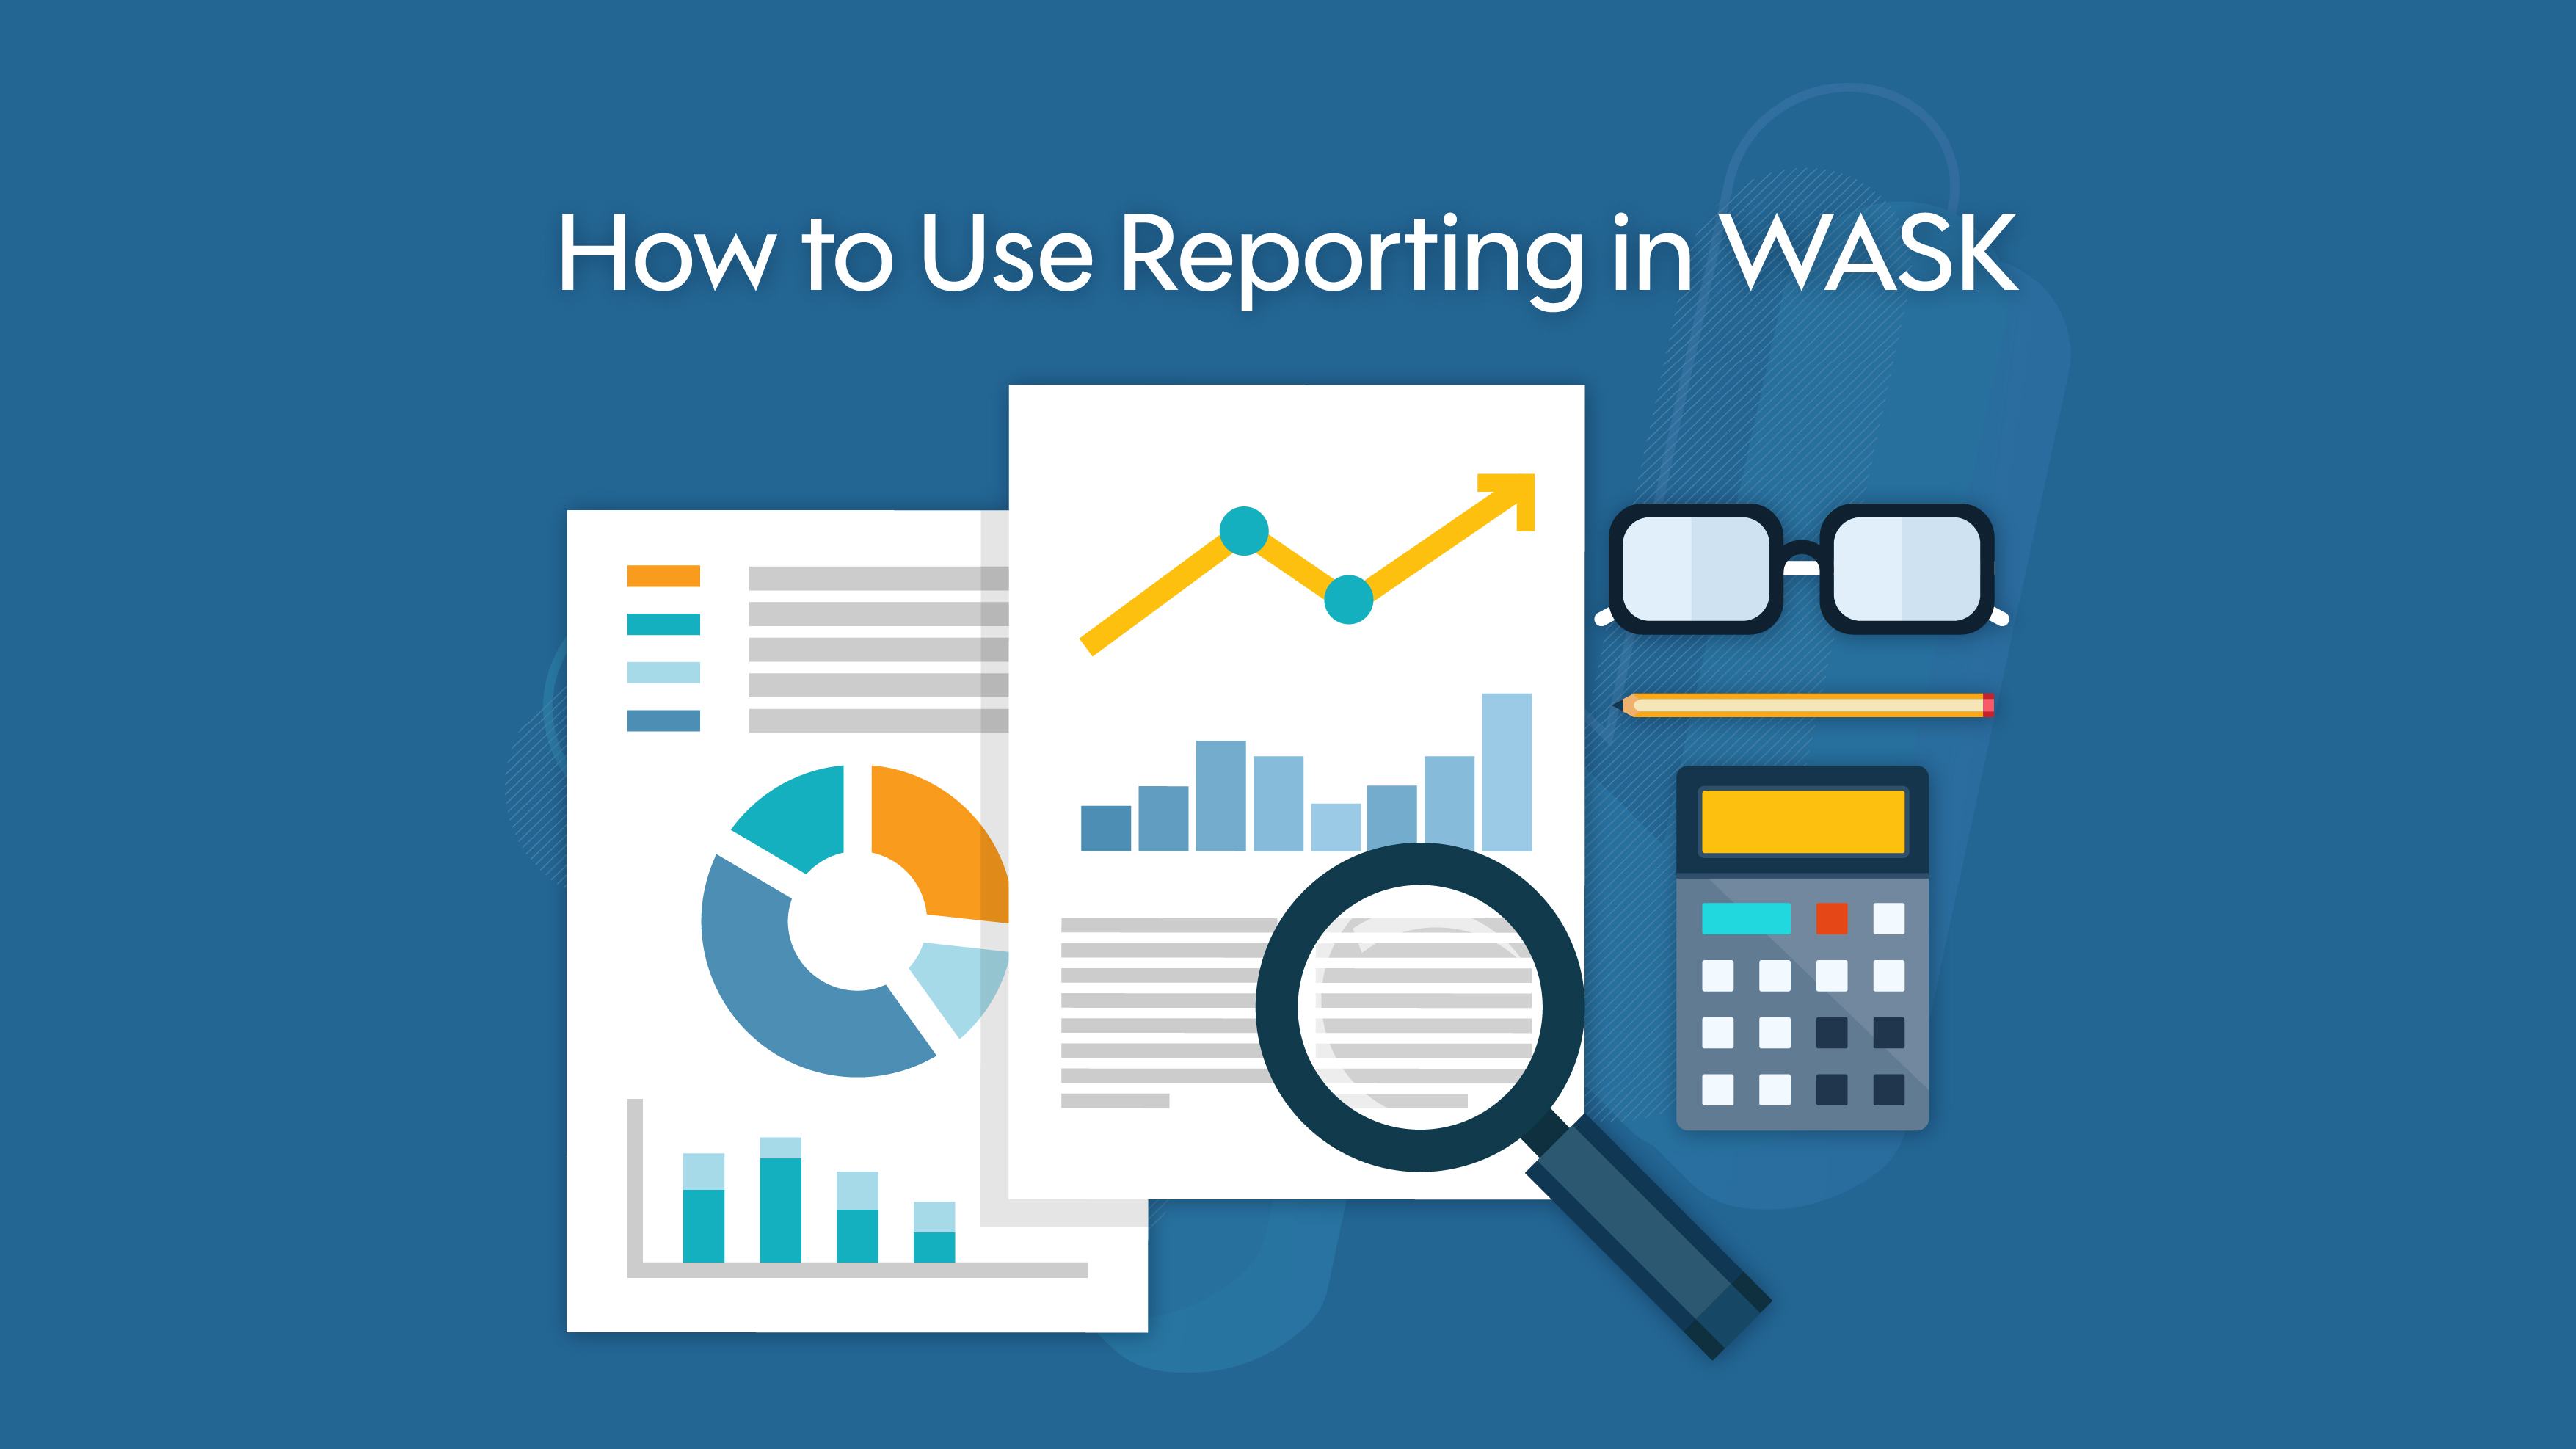 How to Use Reporting in Wask